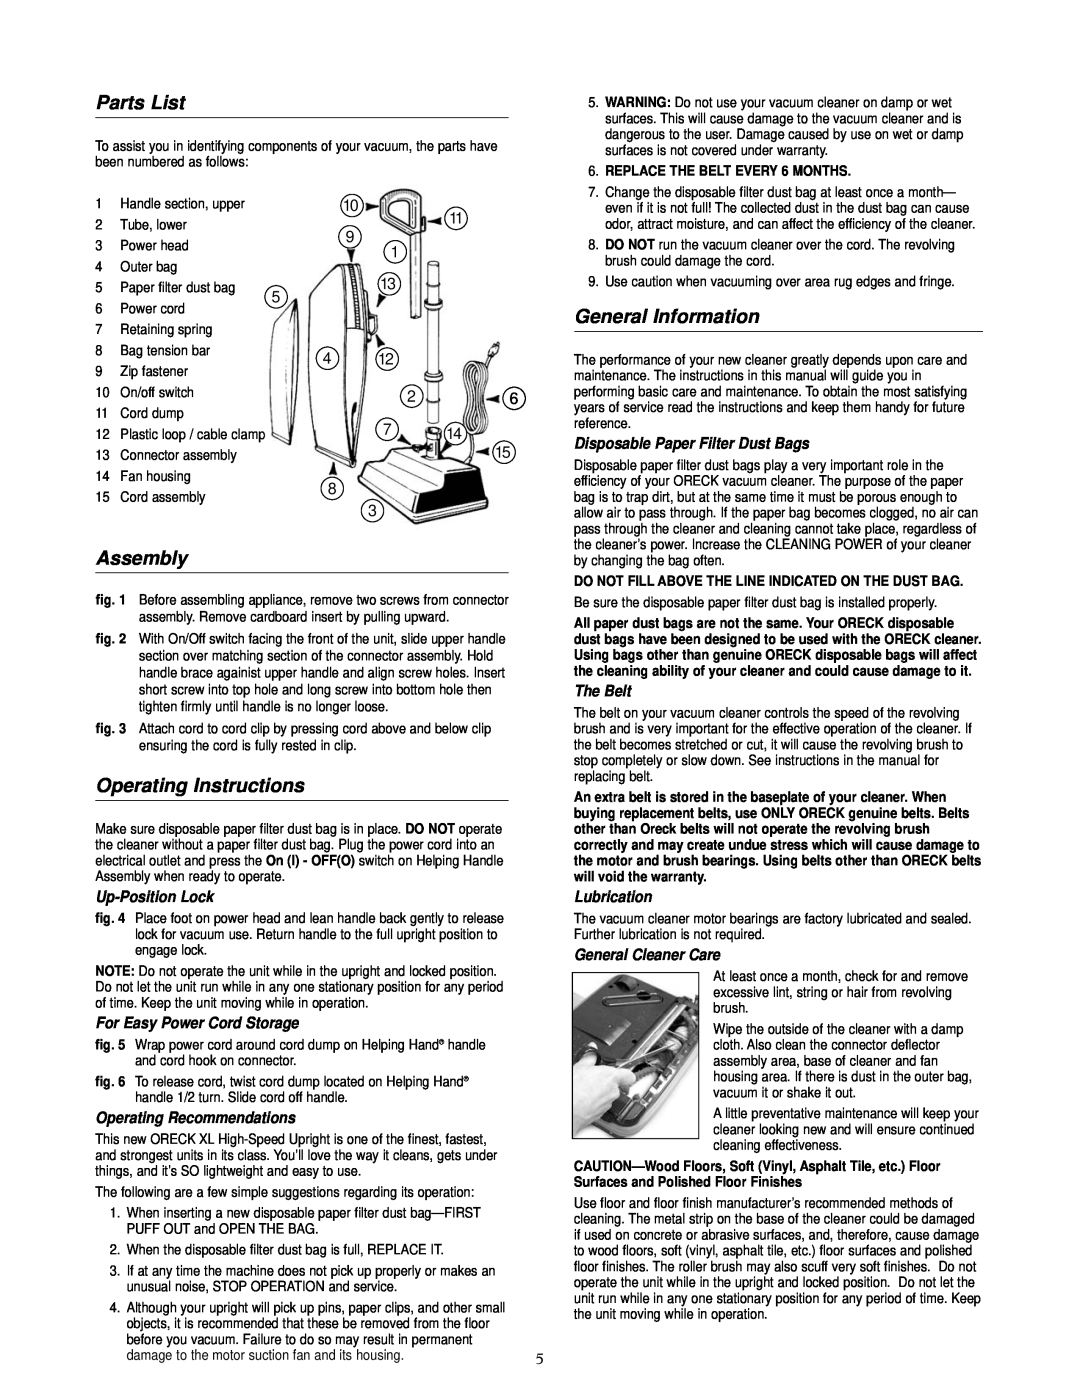 Oreck XL20R7RH Parts List, Assembly, Operating Instructions, General Information, Up-PositionLock, The Belt, Lubrication 